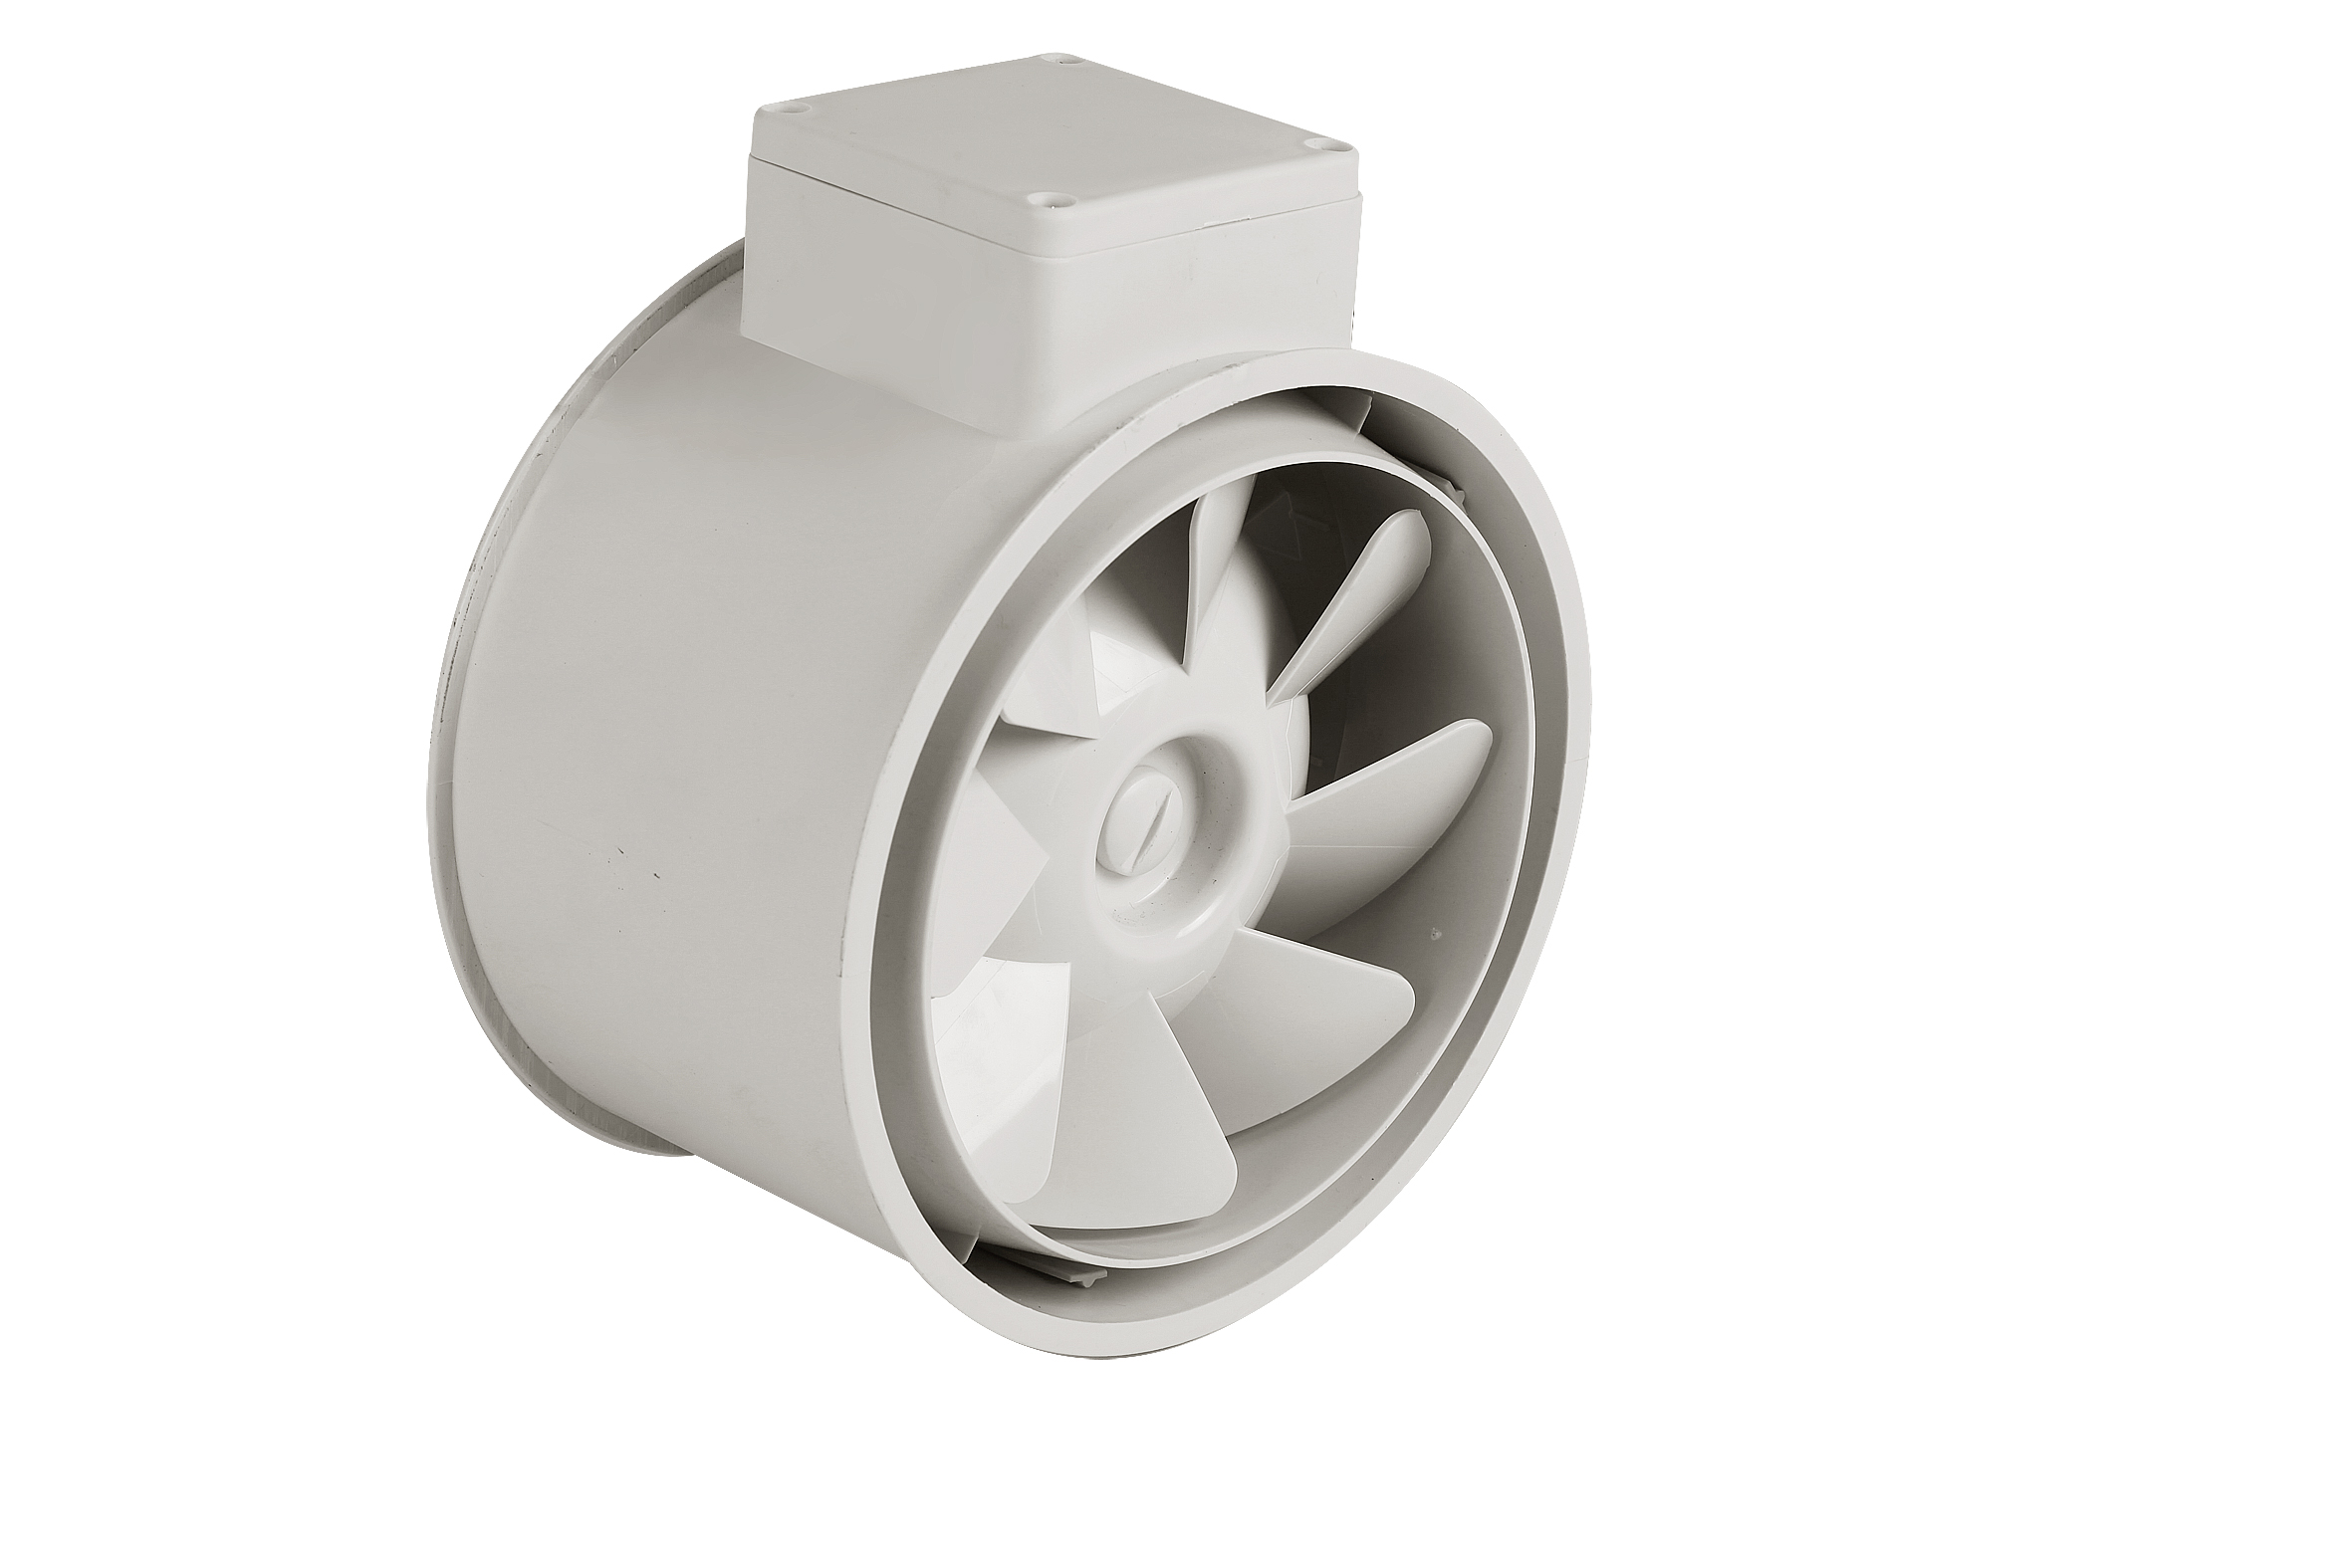 3 Inch Mixed flow inline duct fan for agriculture ventilation(DJT75UM-25P)